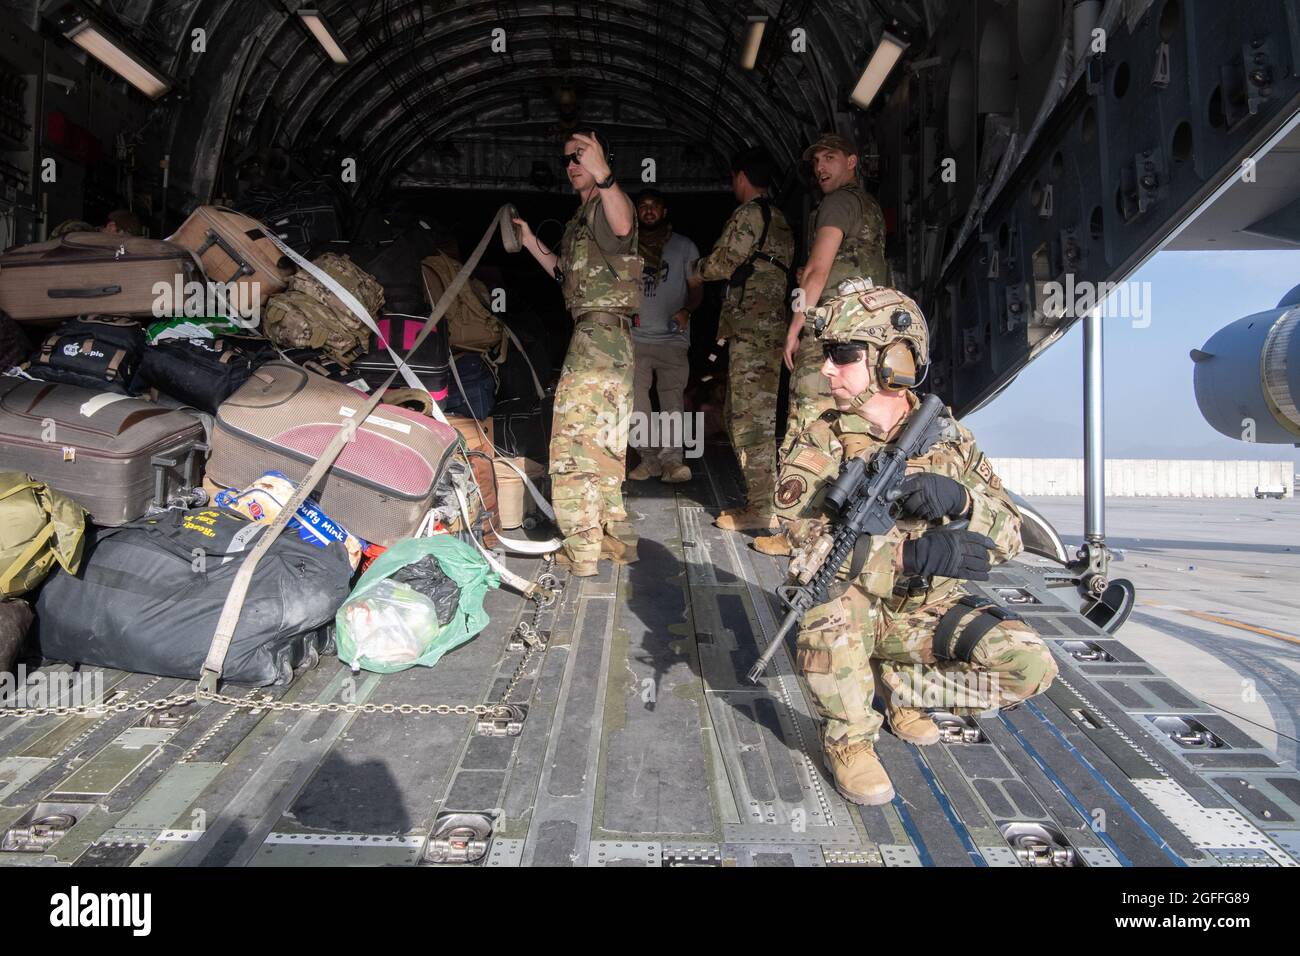 Kabul, Afghanistan. 24th Aug, 2021. A U.S. Air Force airman with security forces raven, 816th Expeditionary Airlift Squadron, maintains a security cordon around a U.S. Air Force C-17 Globemaster III aircraft during the evacuation of Afghan refugees during Operation Allies Refuge August 24, 2021 in Kabul, Afghanistan. Credit: Planetpix/Alamy Live News Stock Photo